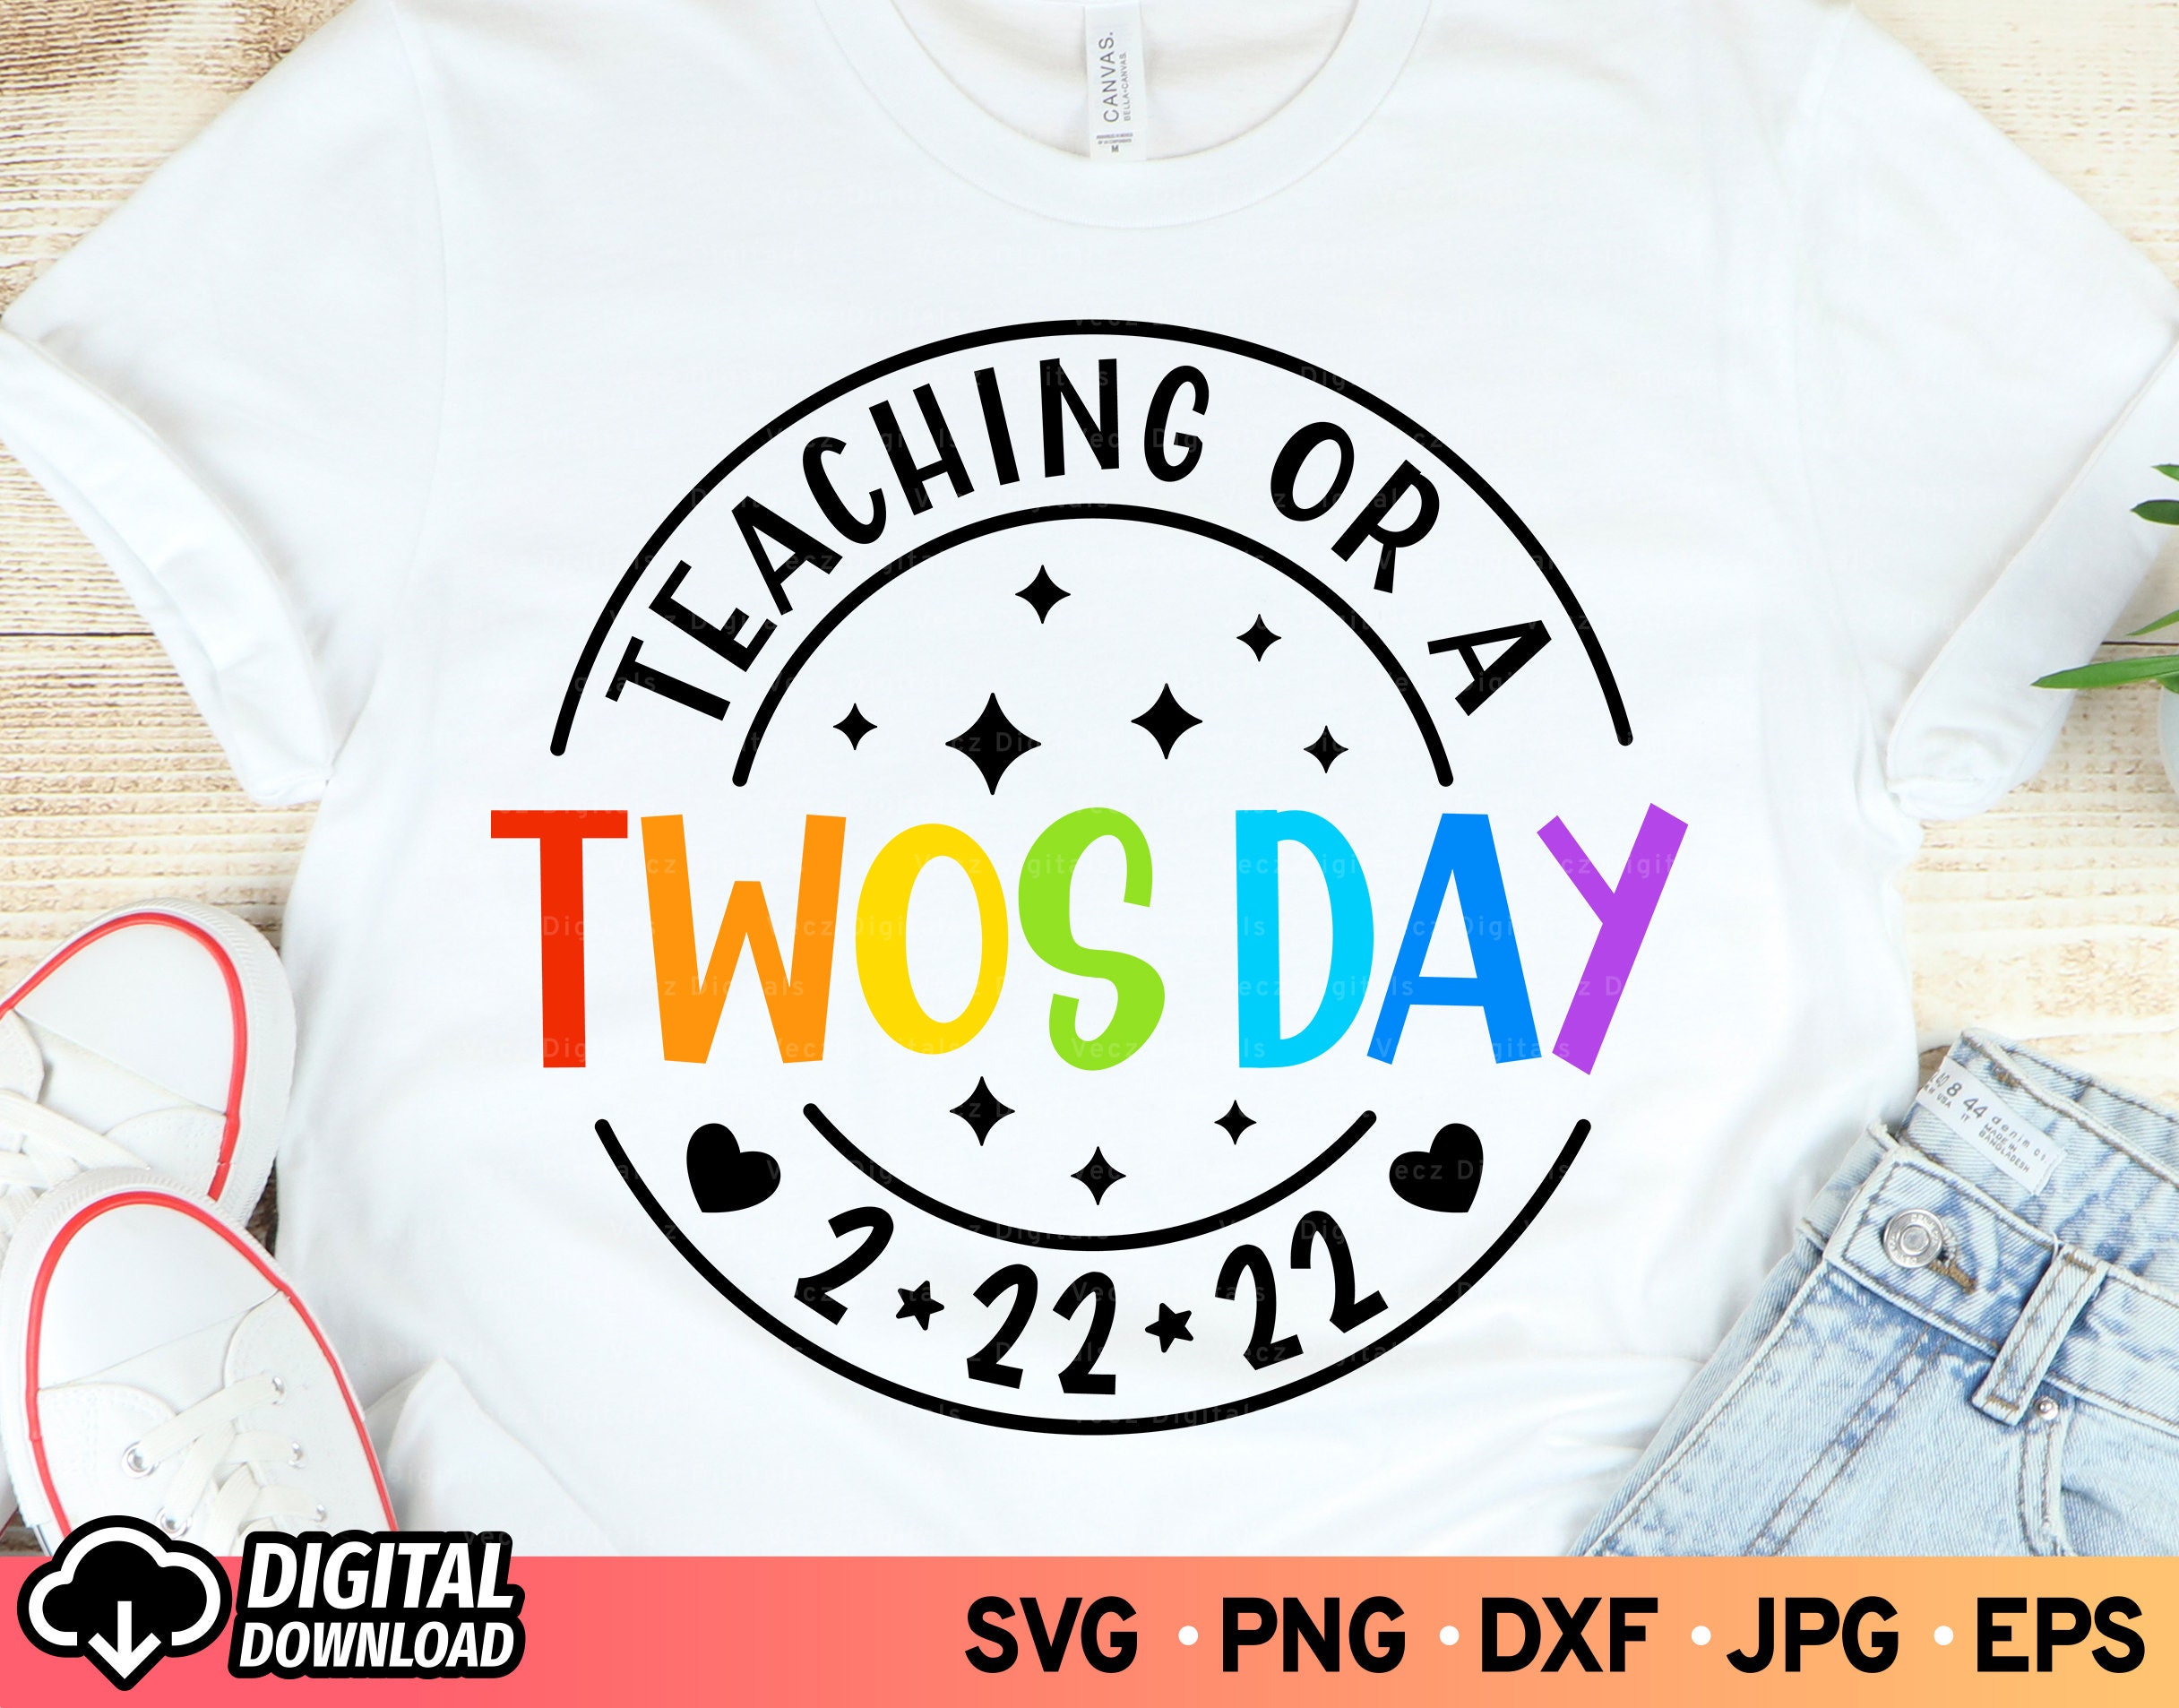 Twosday SVG Bundle Today is Too Cool SVG 2-22-22 Tuesday - Etsy